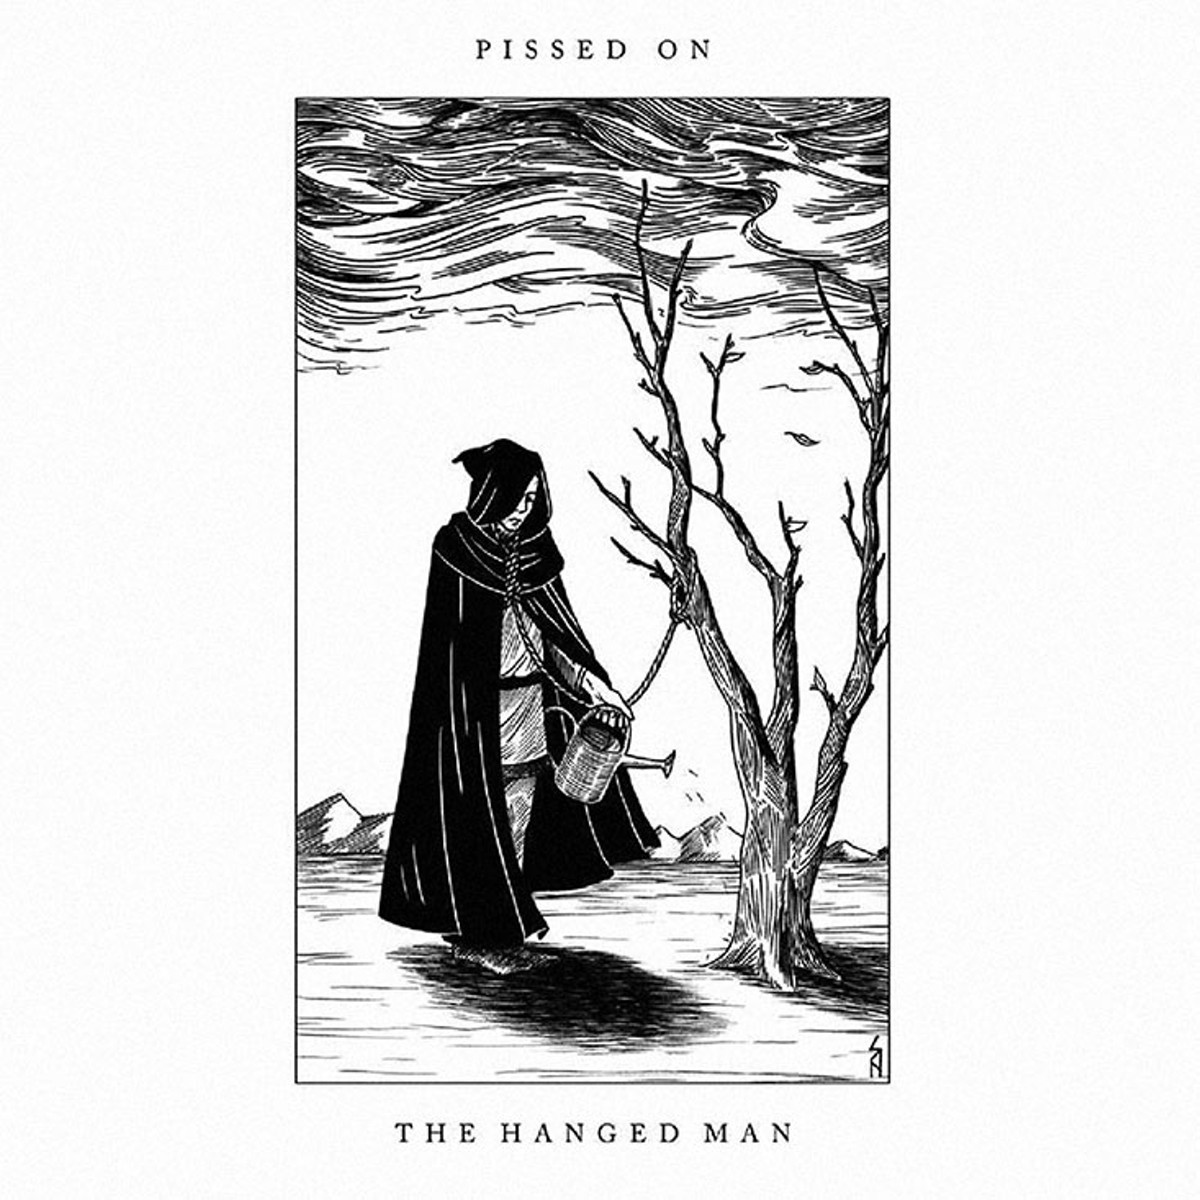 Pissed On: The Hanged Man